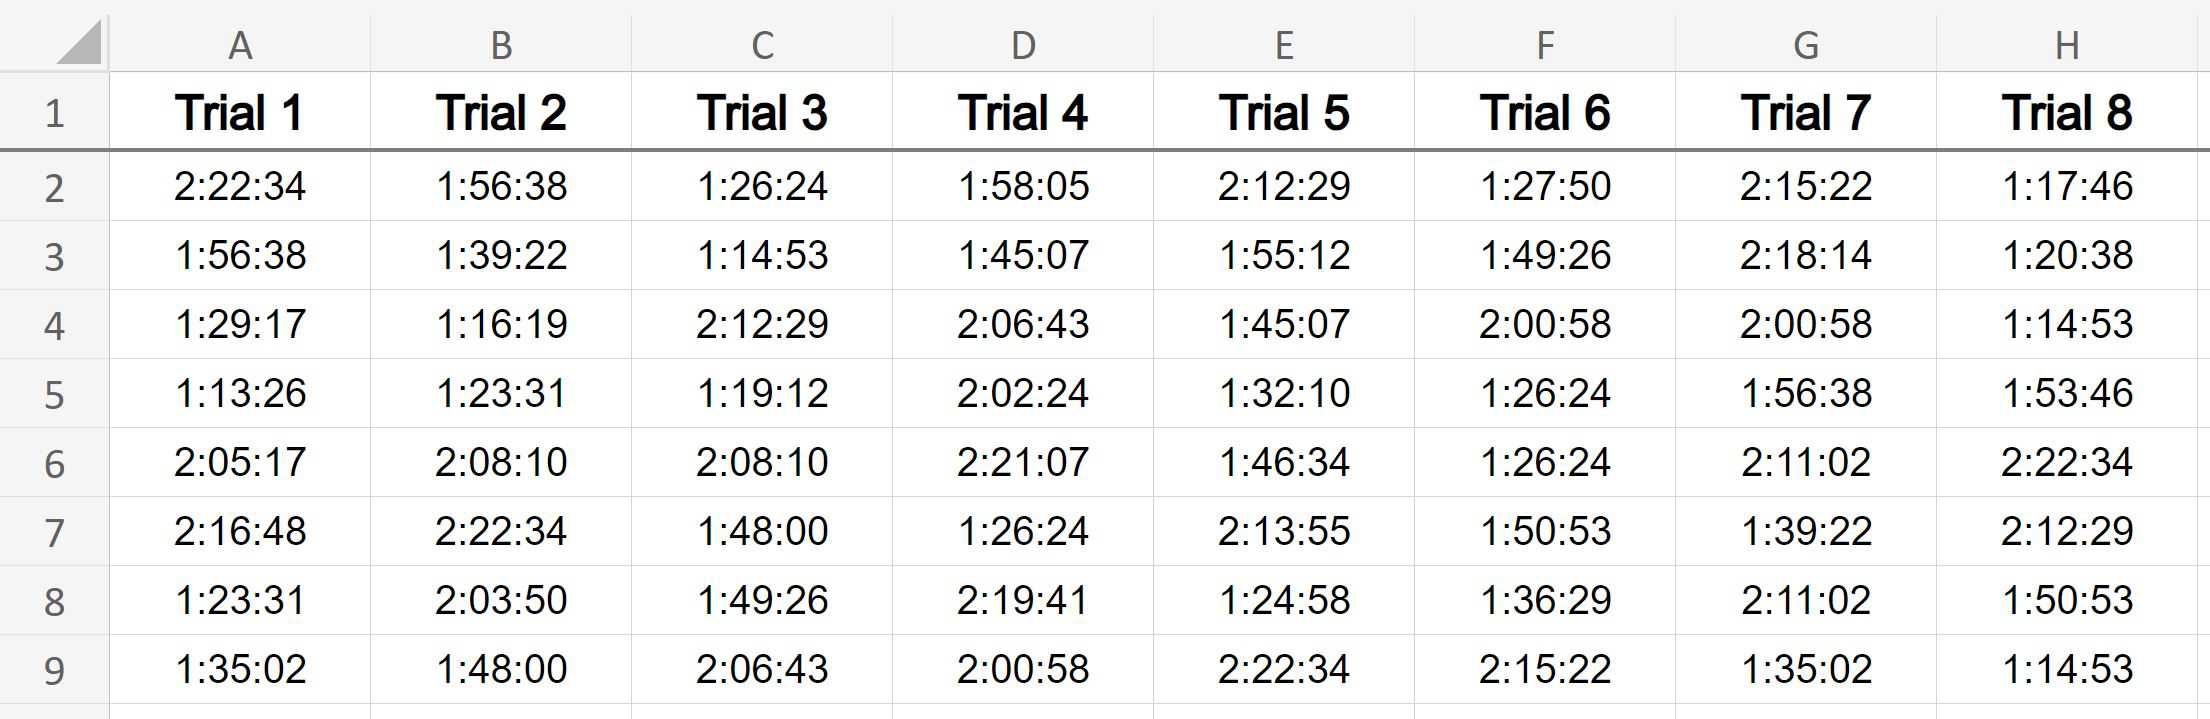 Example of Time trials data in Microsoft Excel before resizing all columns to fit the text